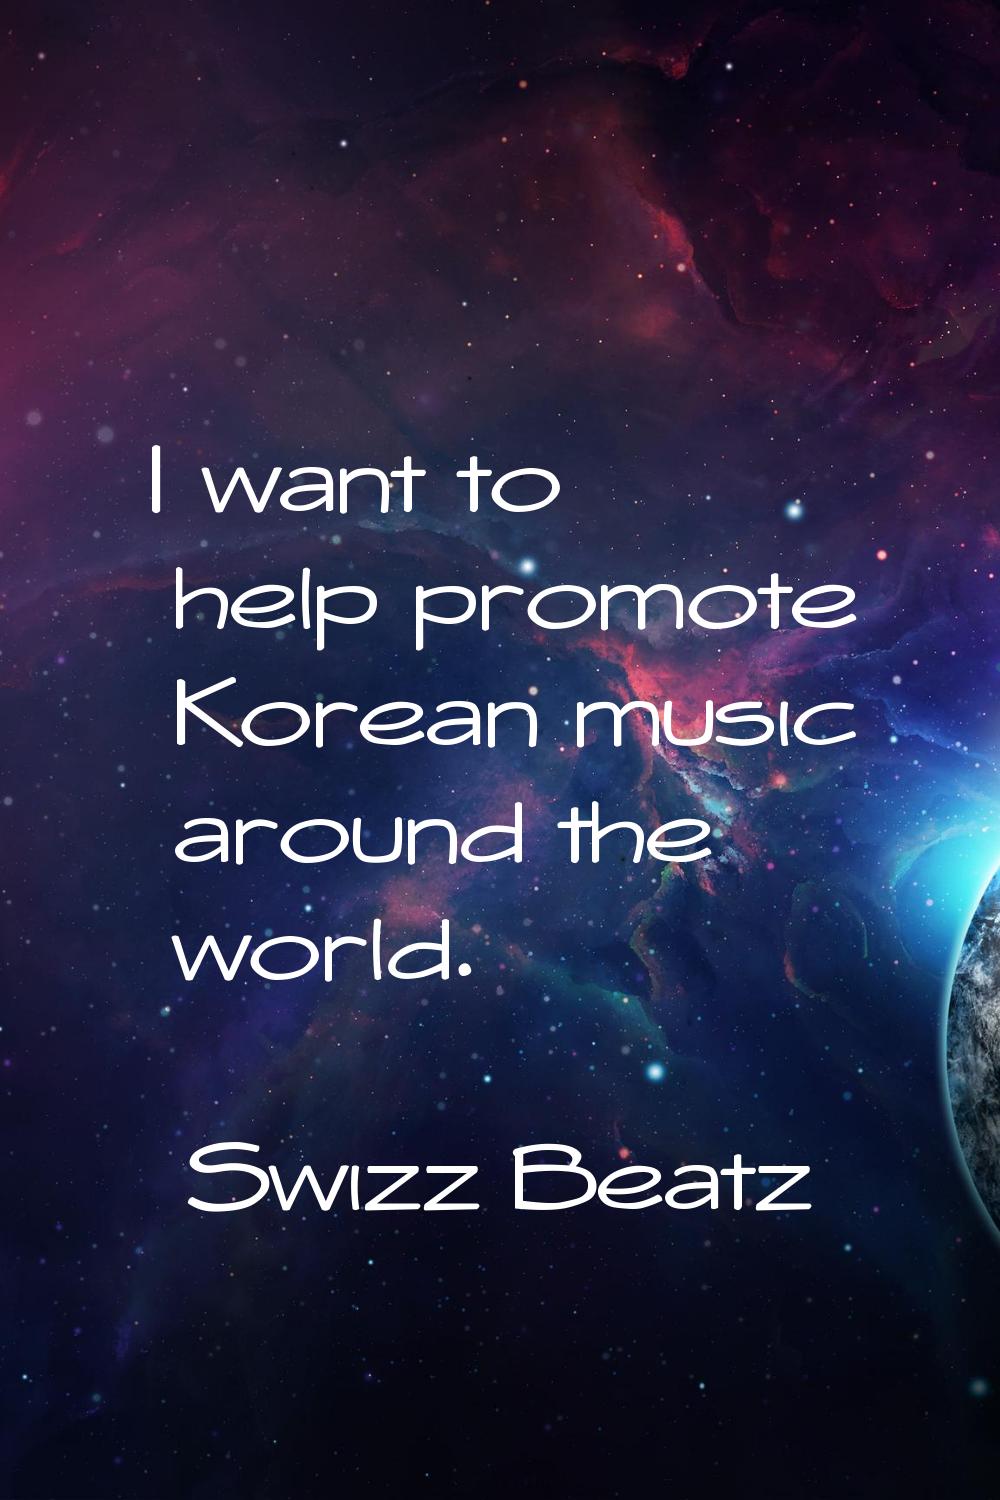 I want to help promote Korean music around the world.